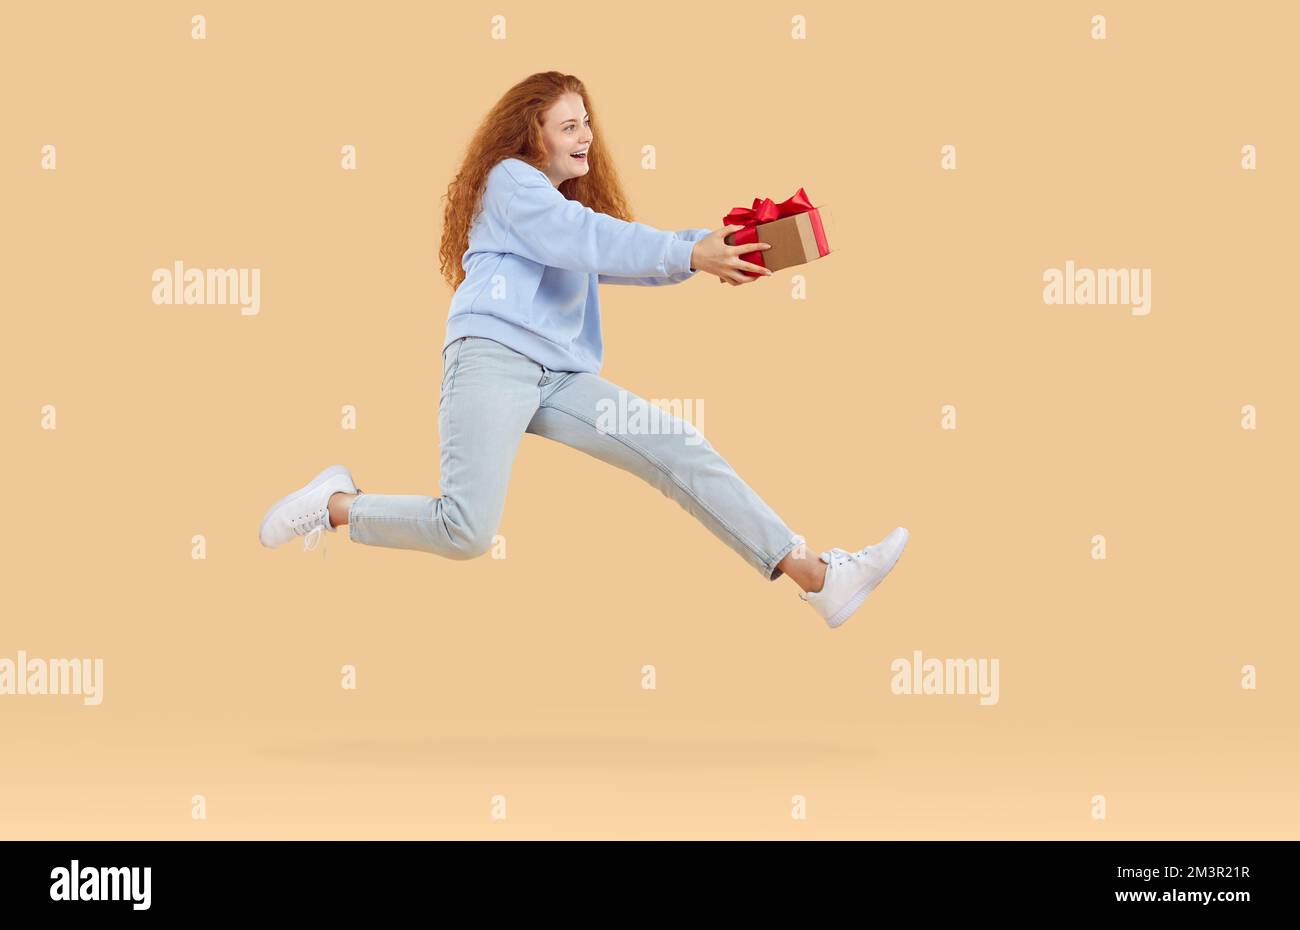 Happy curly redhead girl jumping in air holding Xmas gift present in hands on beige background. Stock Photo